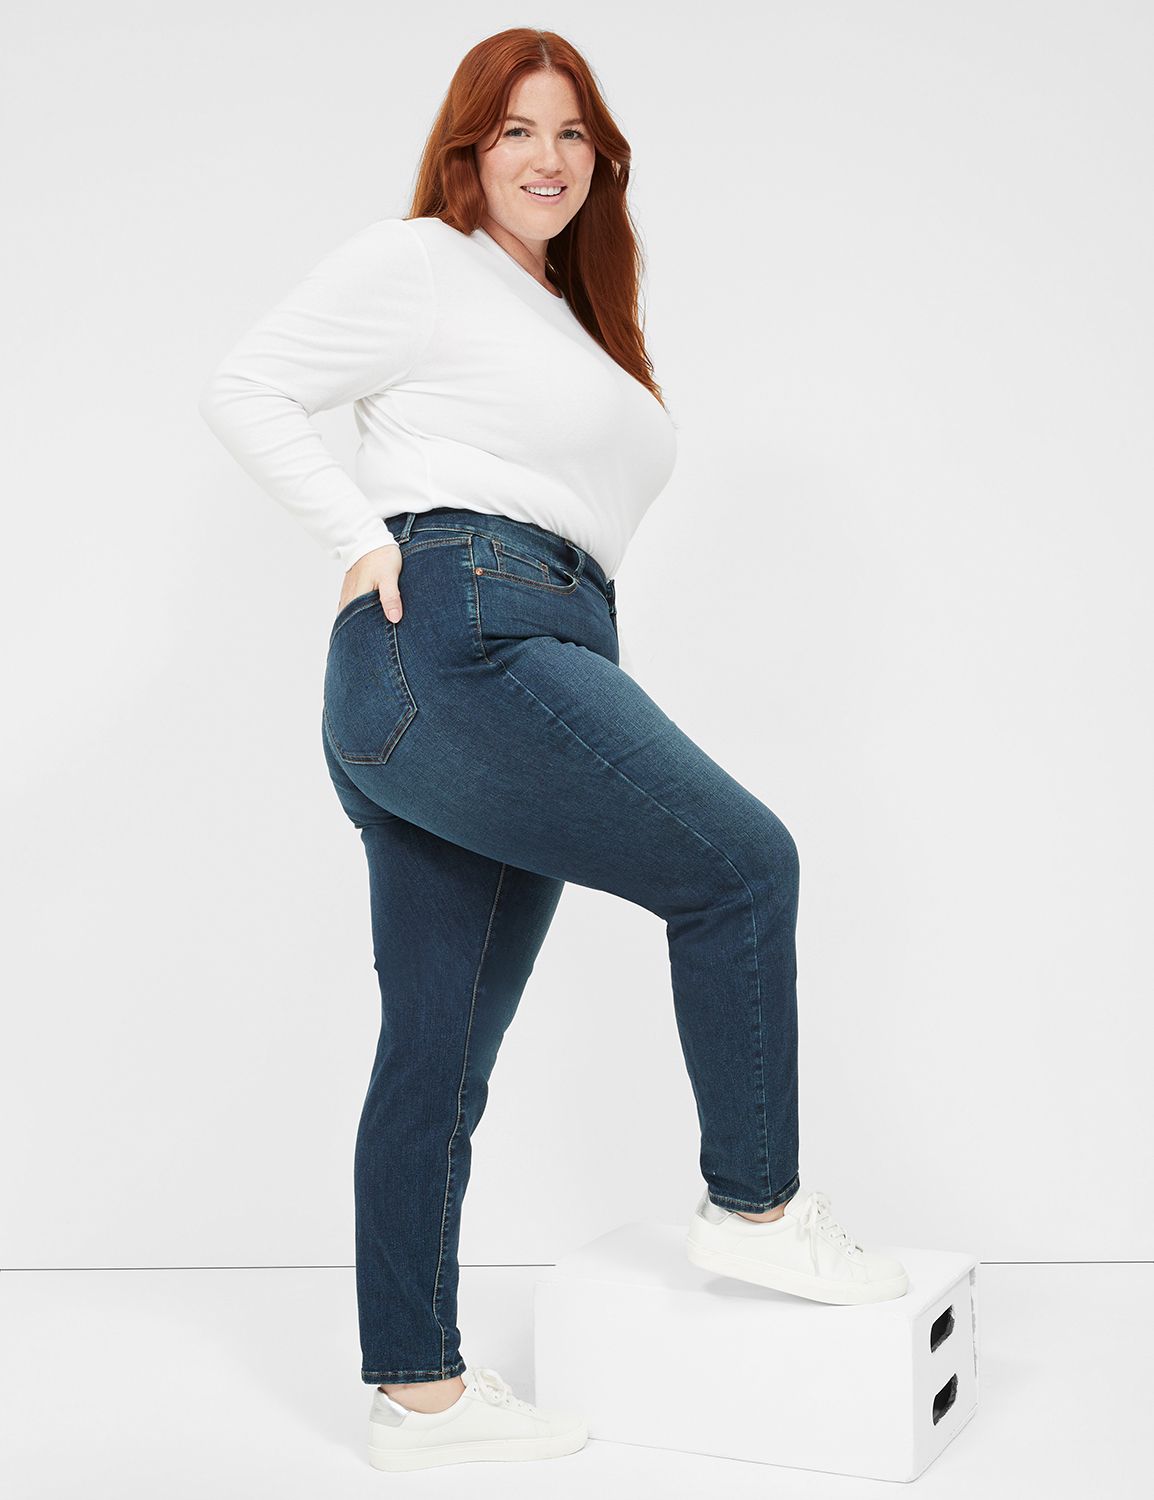 Jean Haul - Stretchy, High Waist and Curvy girl approved! 